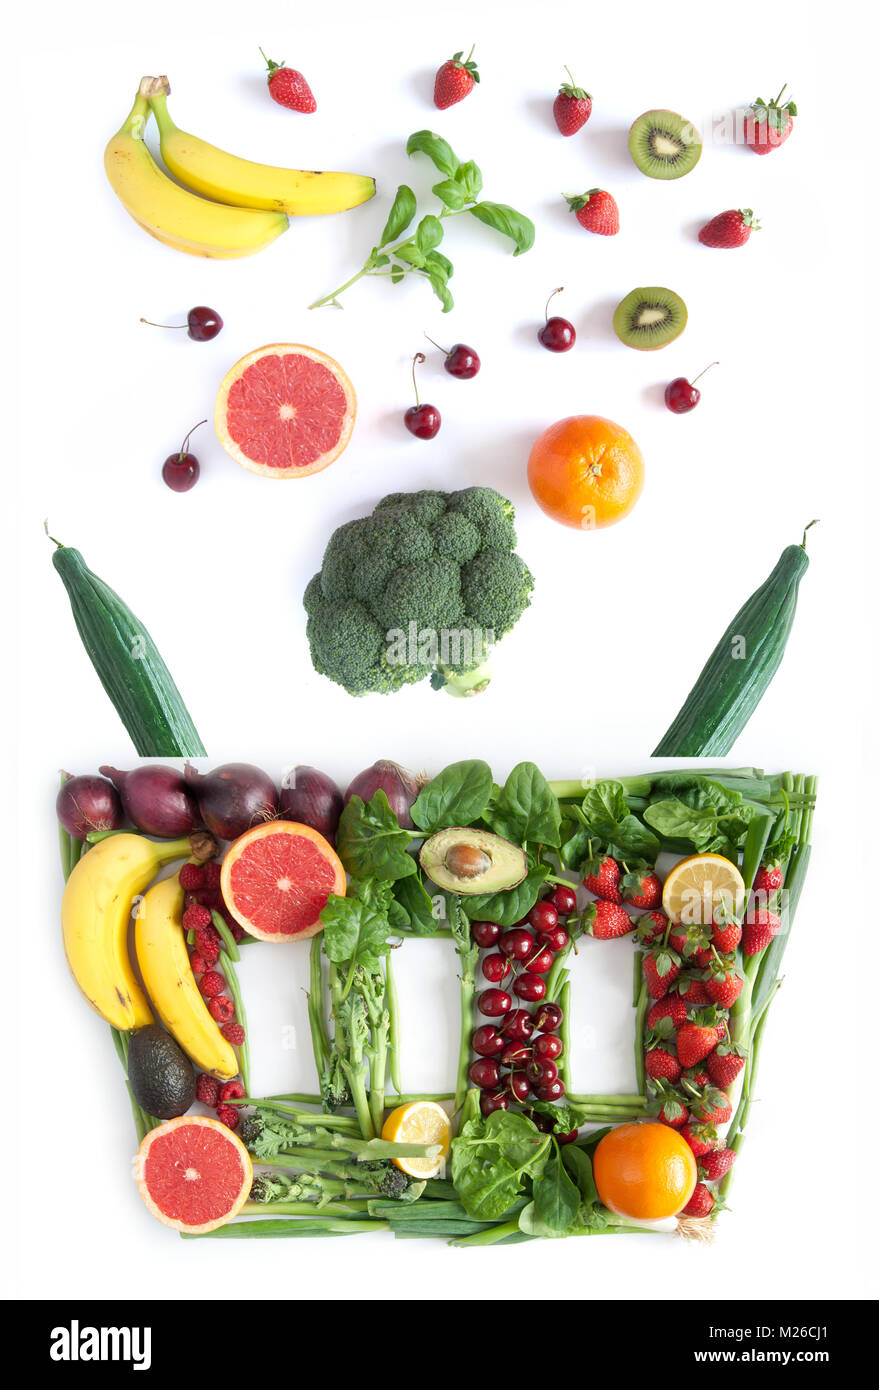 Food falling into a grocery basket made of food over a white background Stock Photo